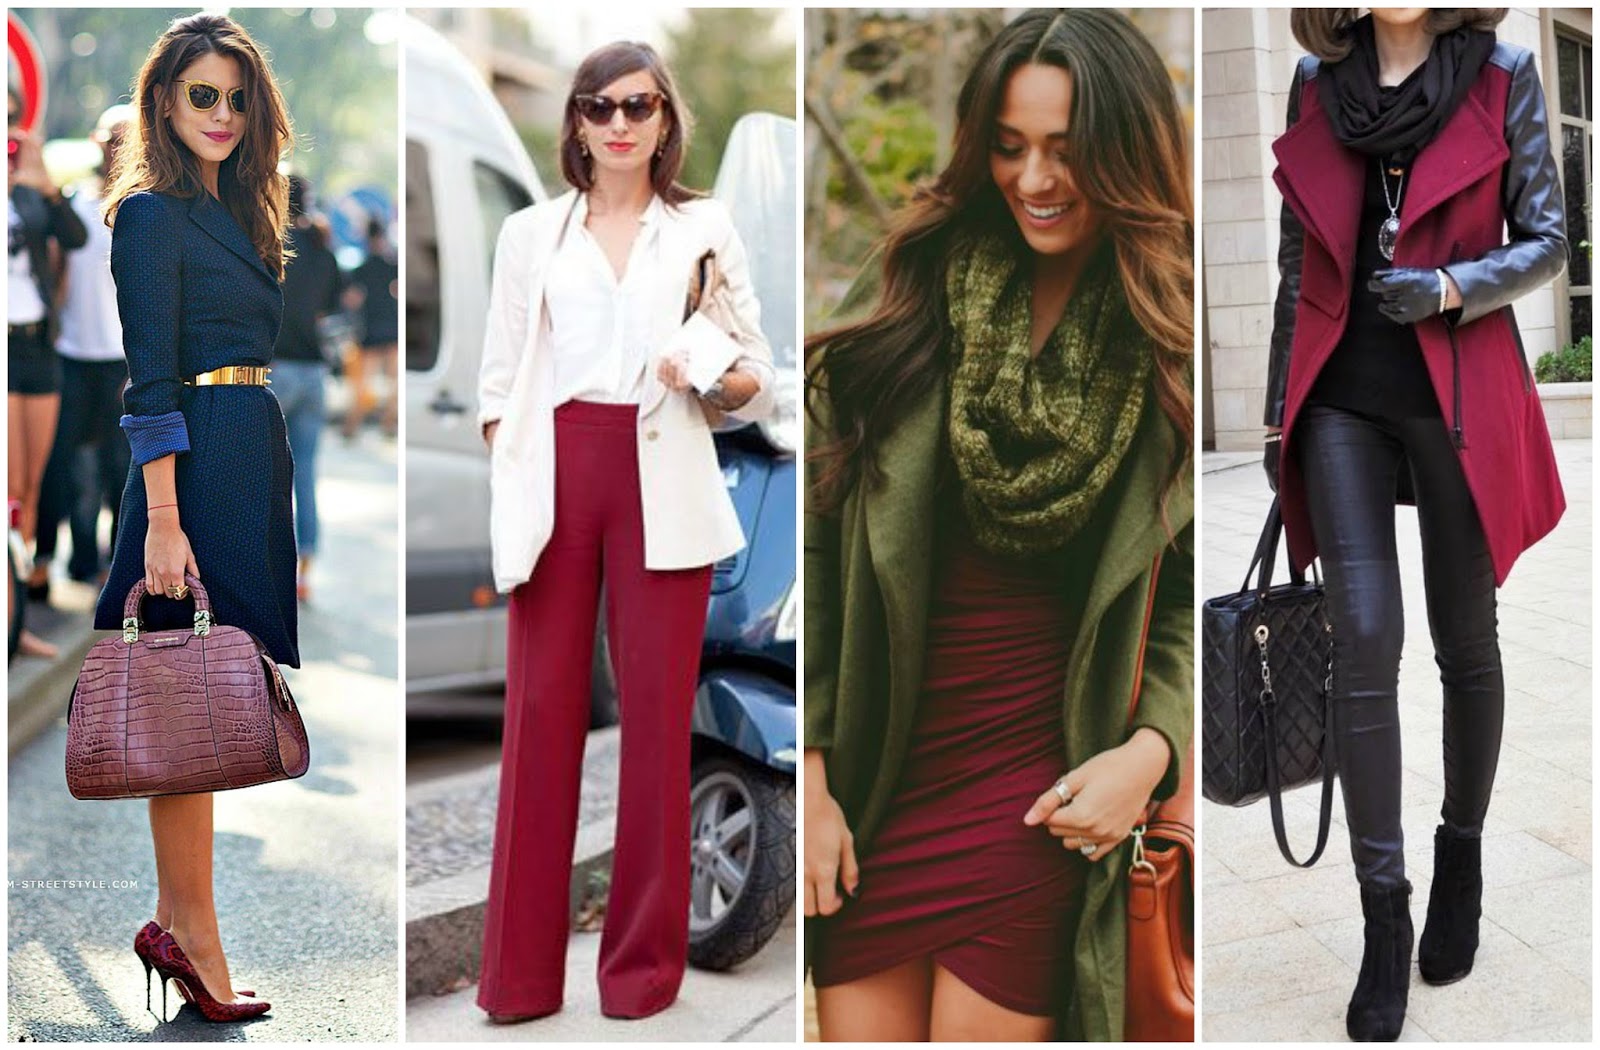 Silk and Spice: How To: Wear Burgundy {a.k.a. Oxblood}